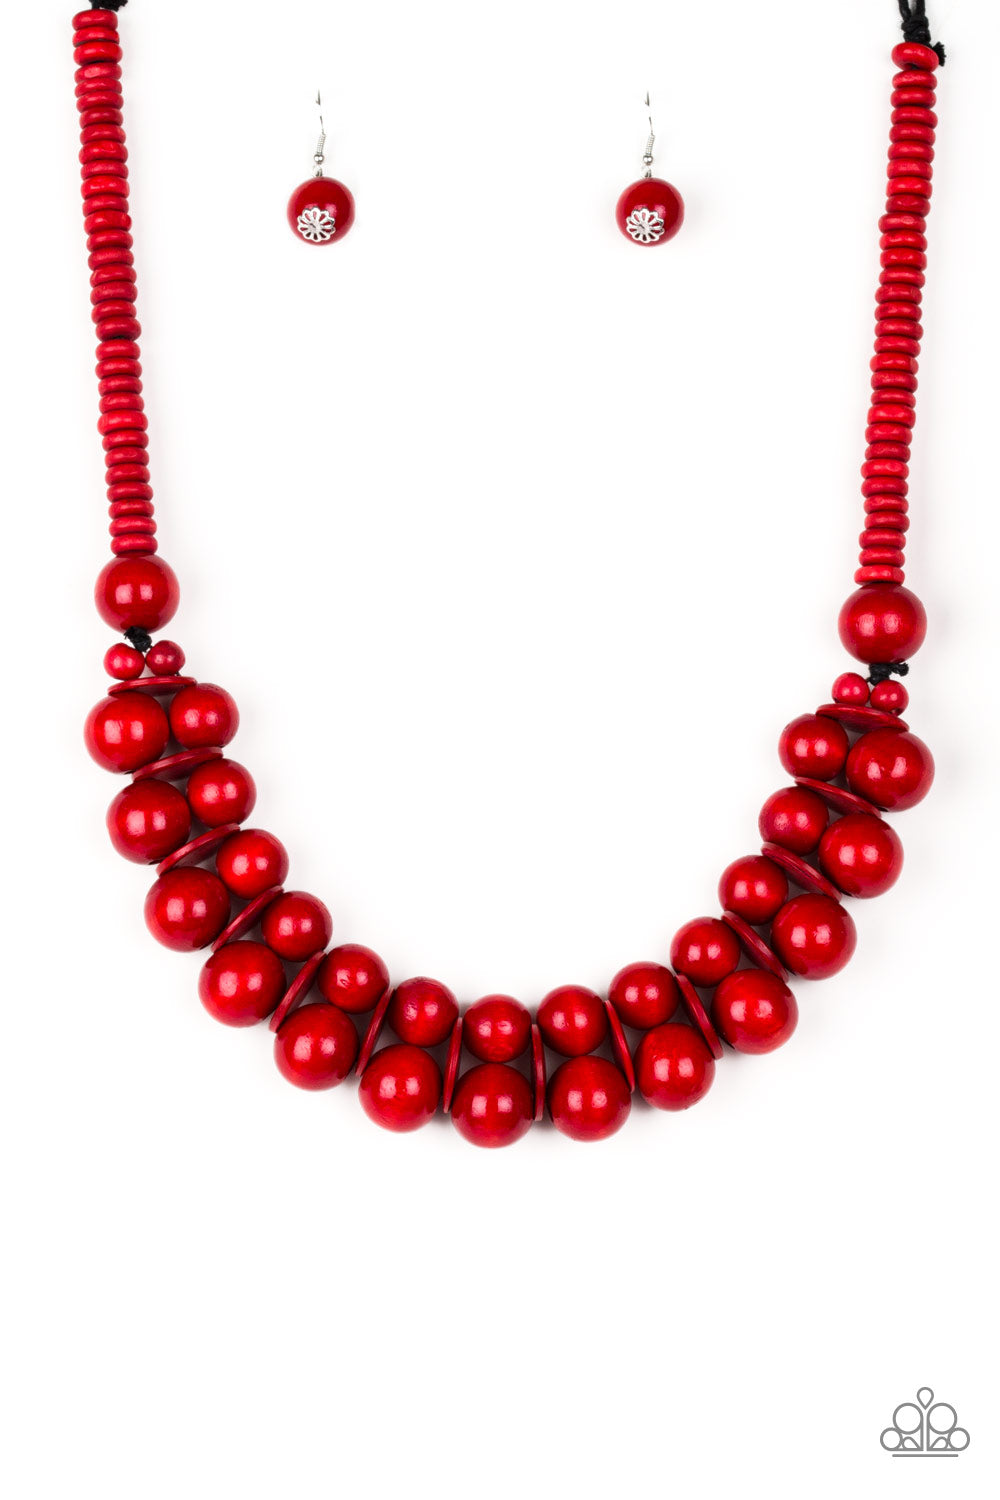 Caribbean Cover Girl - Red Necklace